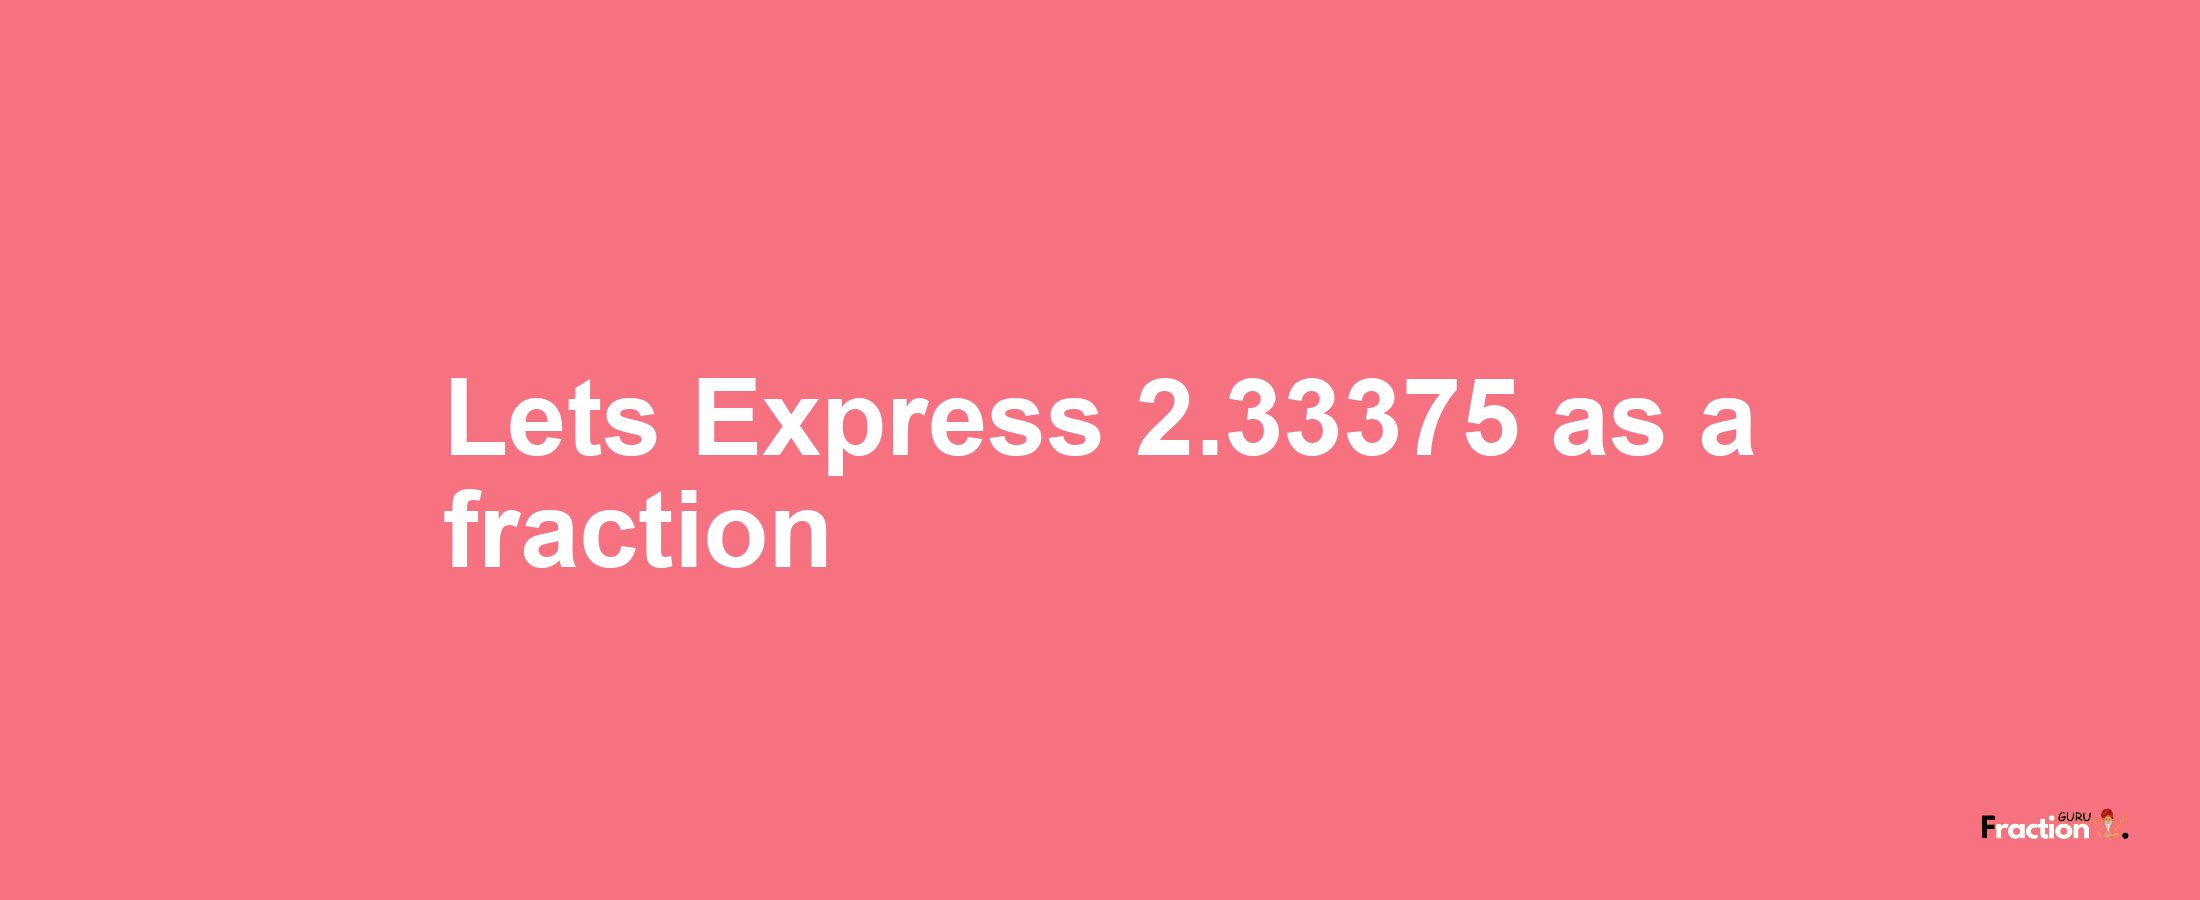 Lets Express 2.33375 as afraction